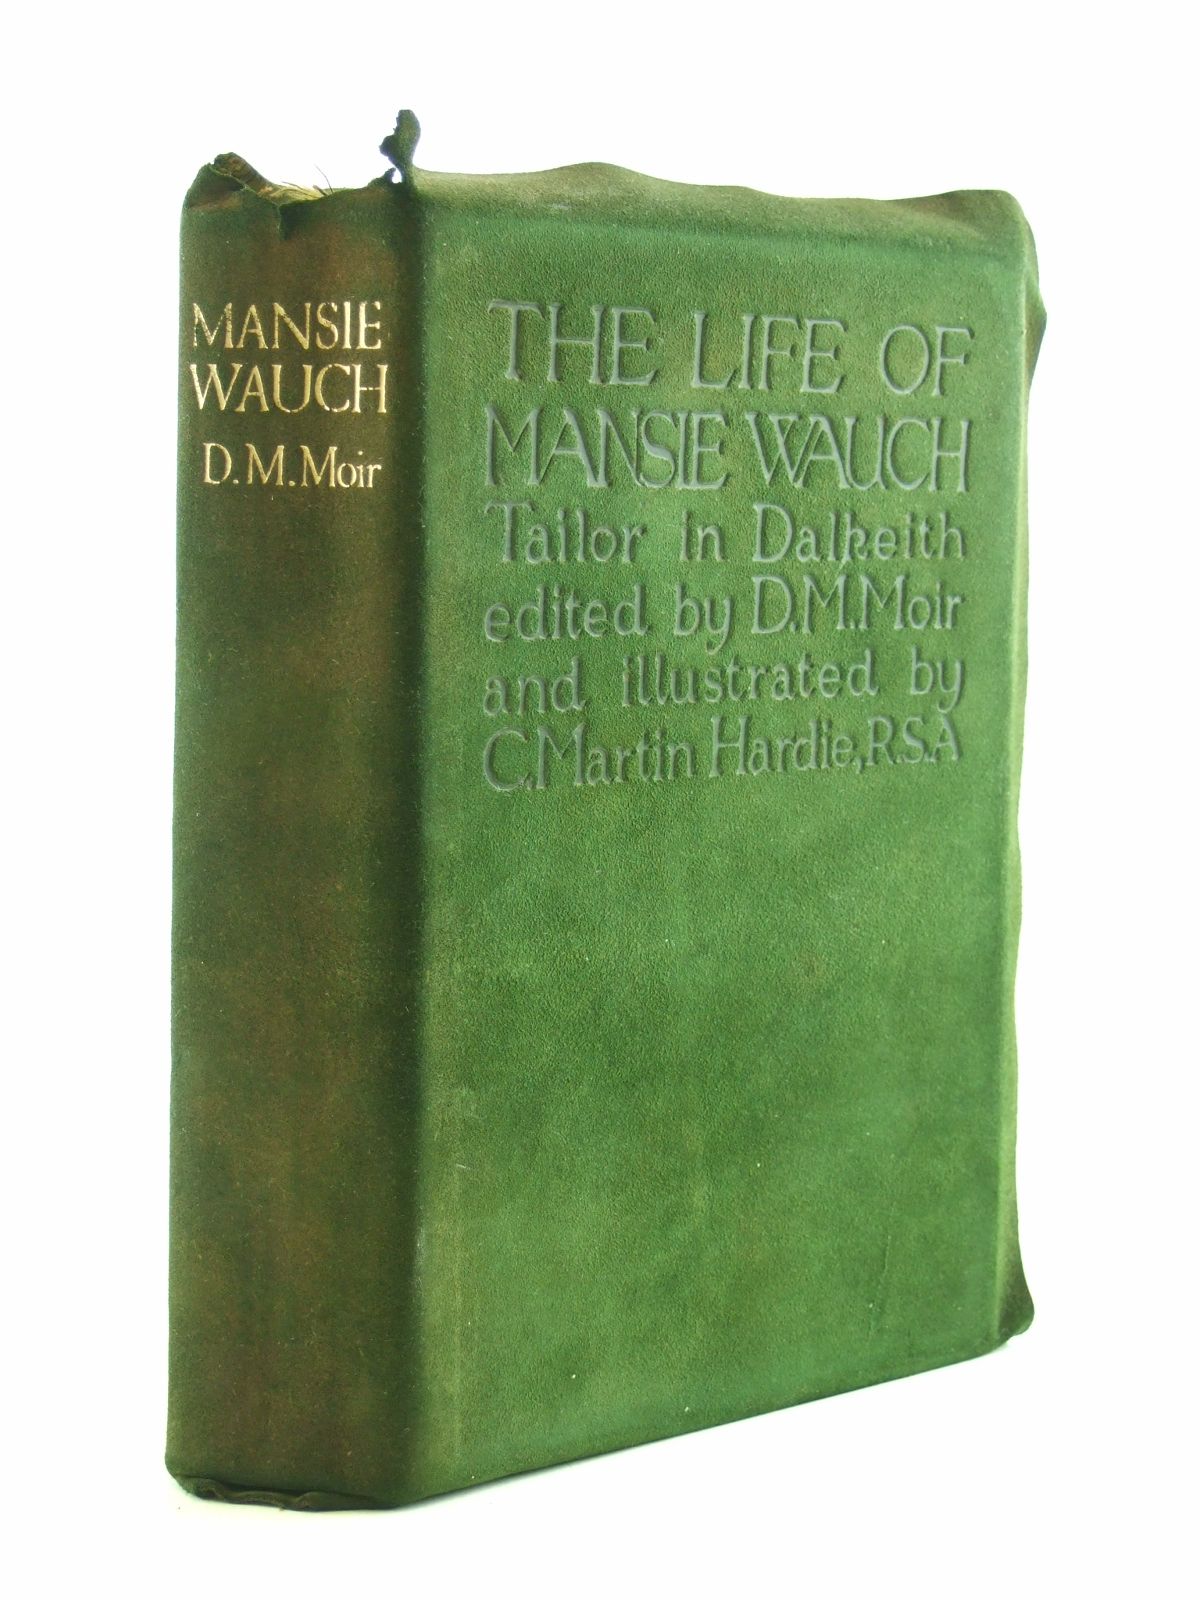 Photo of THE LIFE OF MANSIE WAUCH written by Wauch, Mansie
Moir, D.M. illustrated by Hardie, Charles Martin published by T.N. Foulis (STOCK CODE: 1603733)  for sale by Stella & Rose's Books